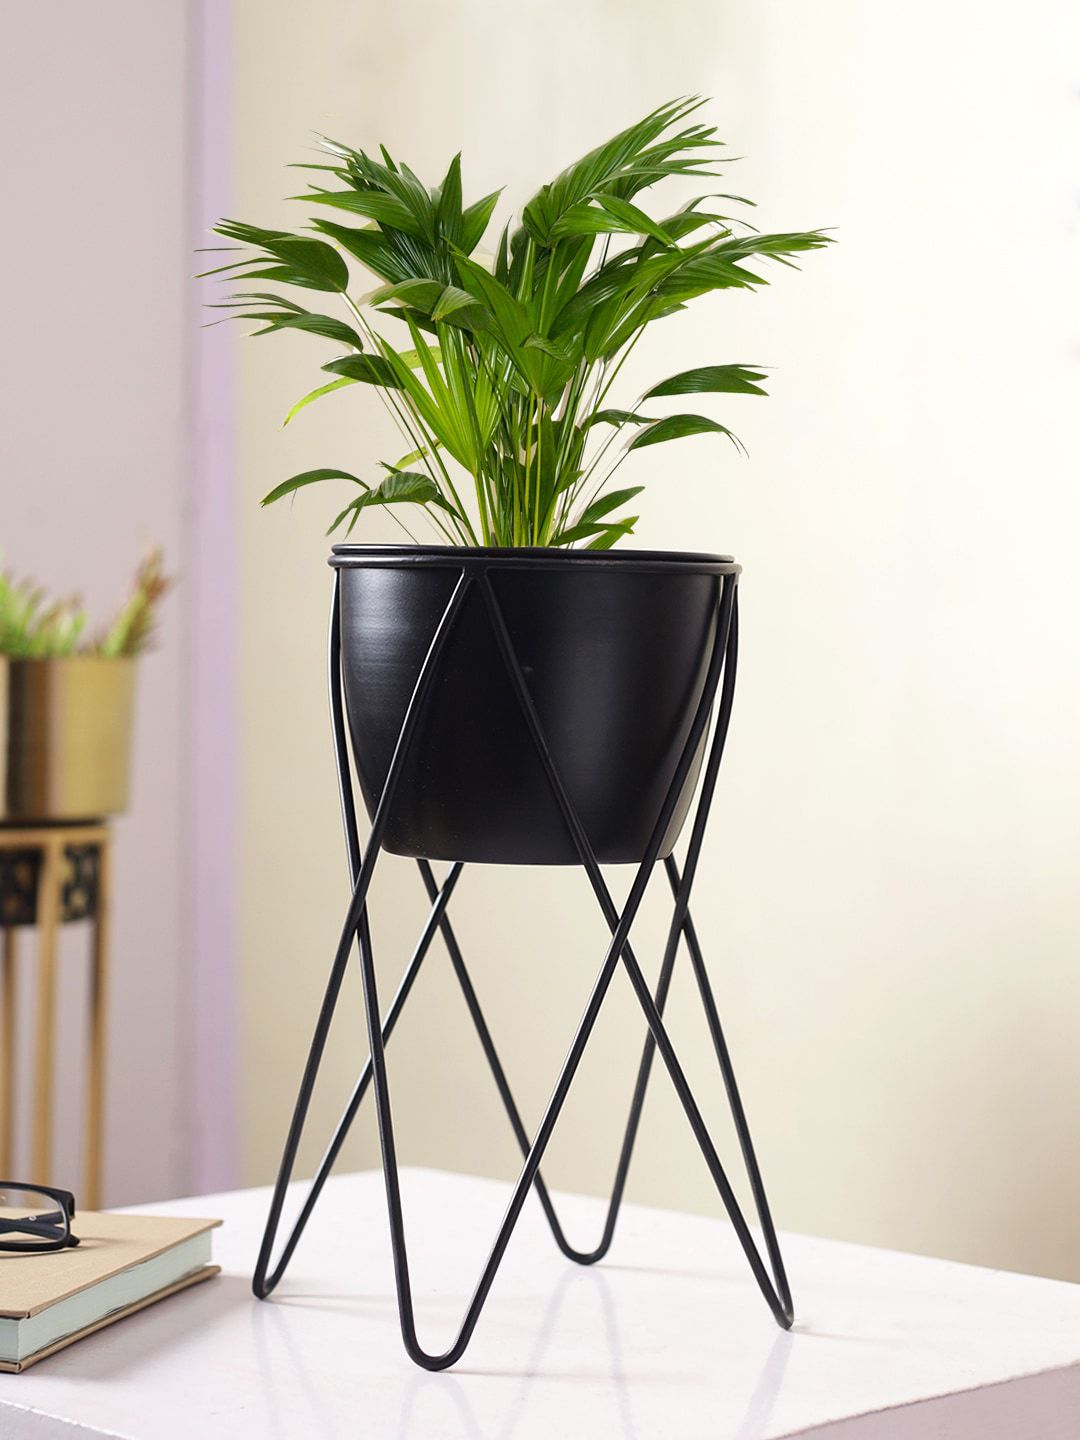 Aapno Rajasthan Solid Metal Planter With Stand Price in India